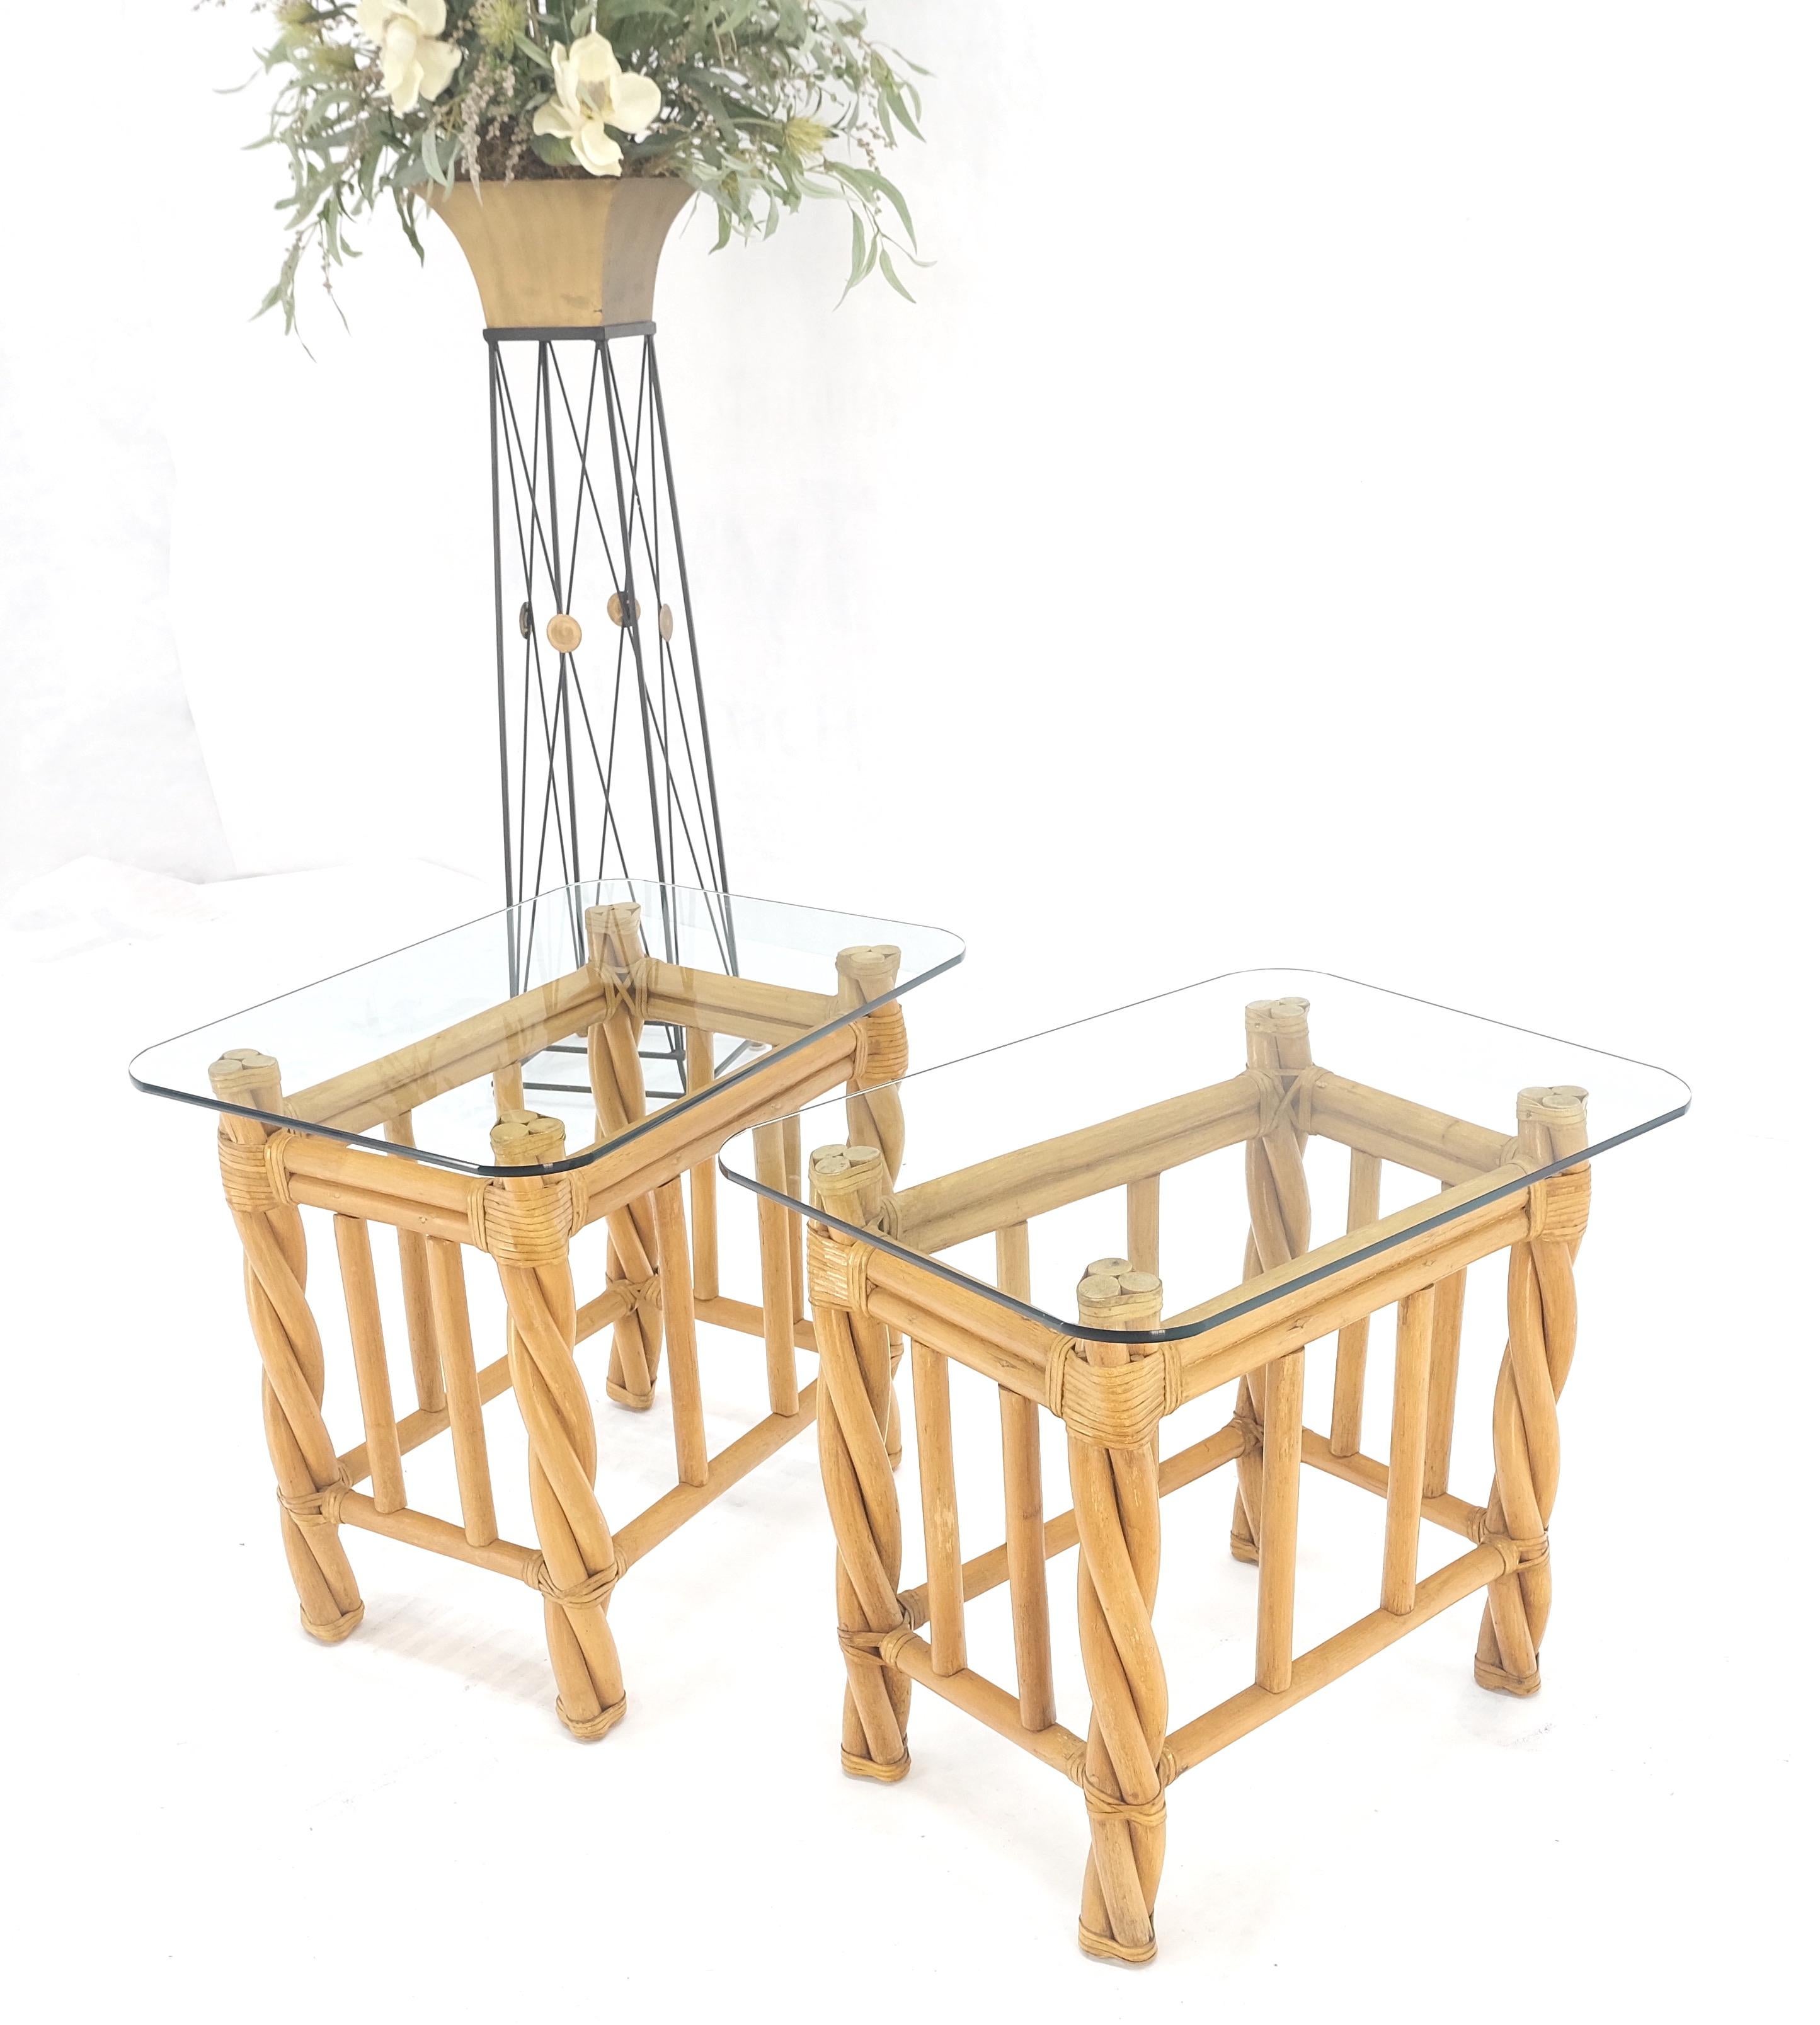 Pair Decorative Twisted Rattan Rectangle End Side Tables Stand Rounded Glass Top In Excellent Condition For Sale In Rockaway, NJ